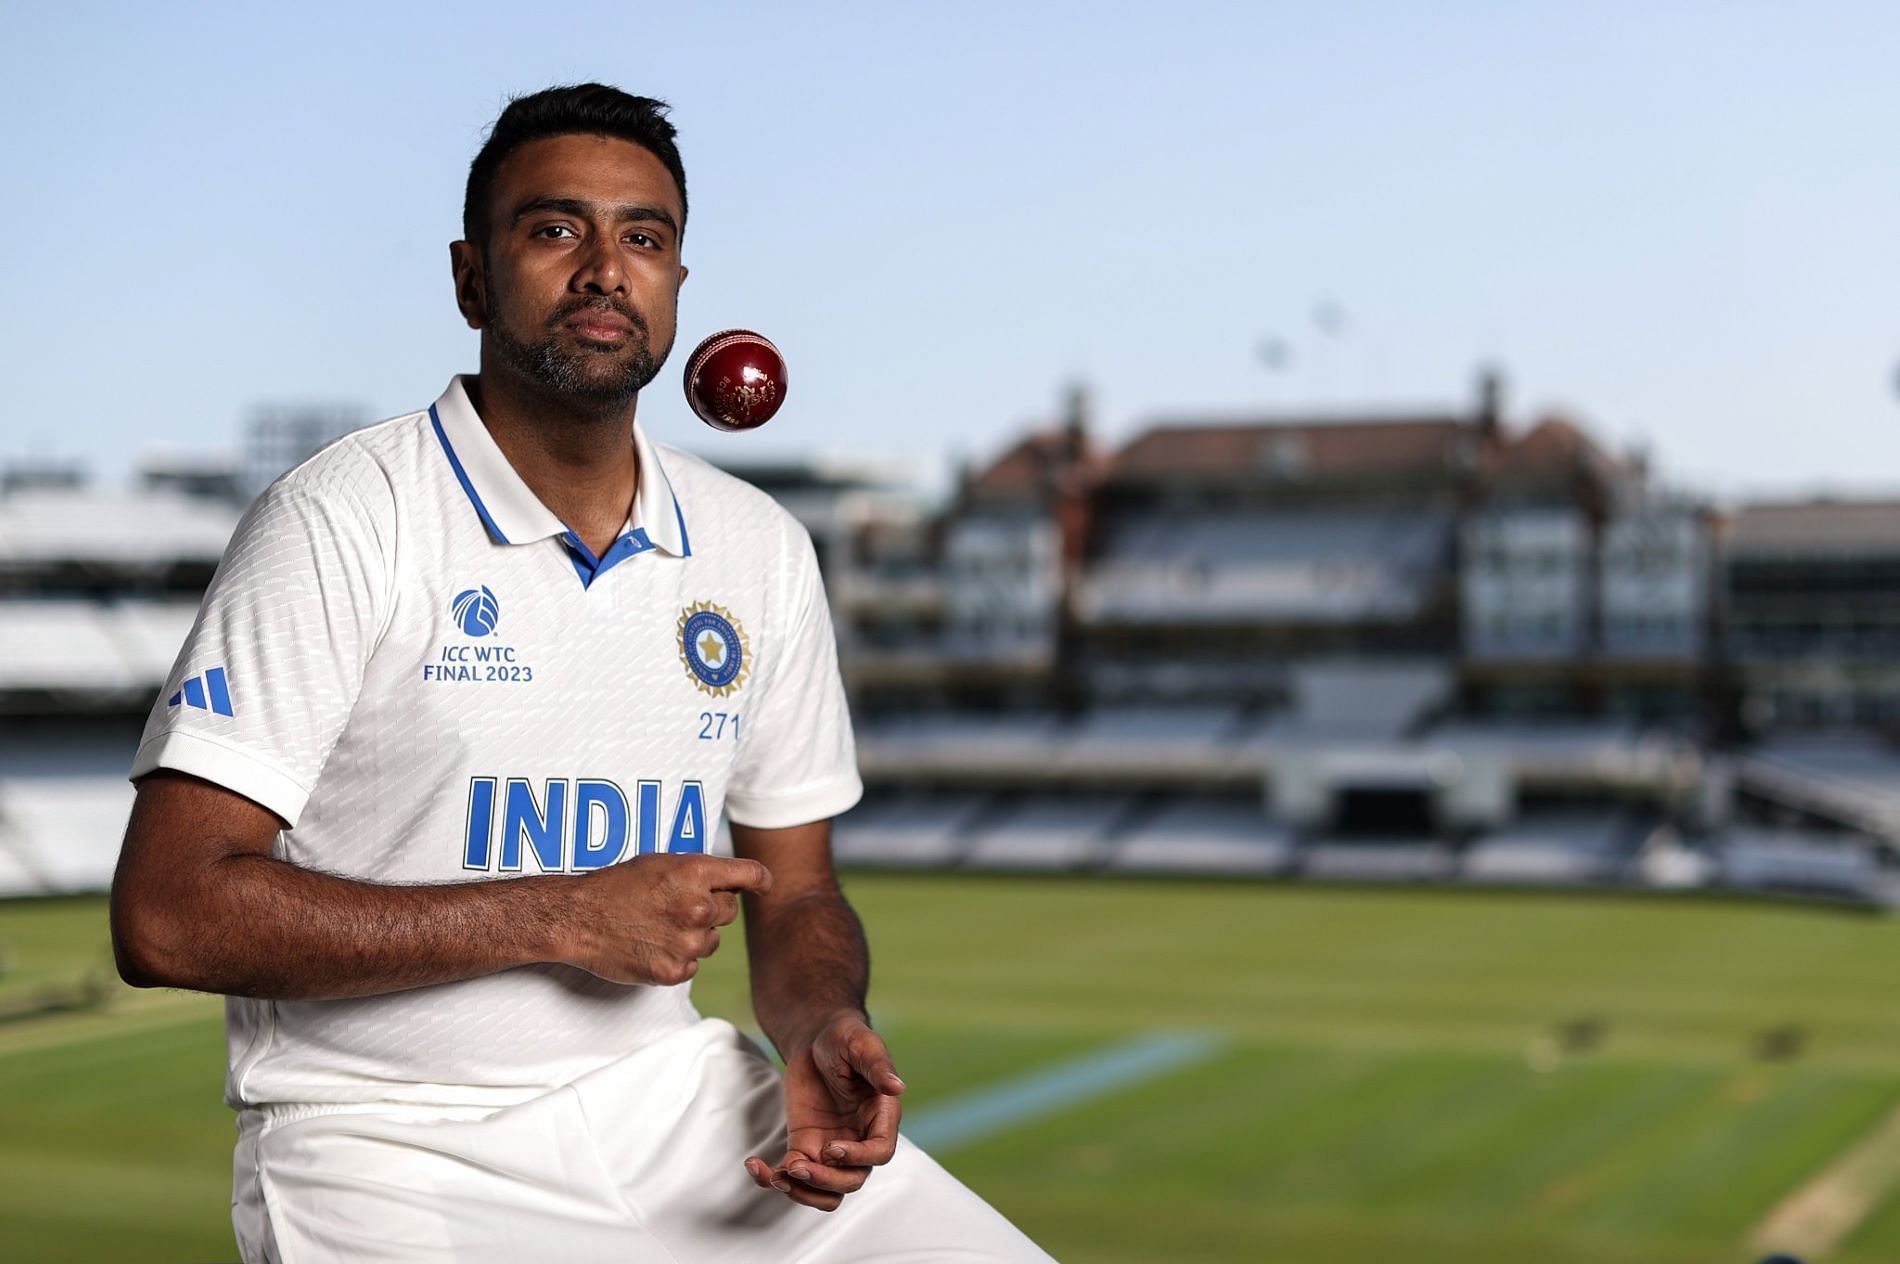 Ravichandran Ashwin missed out on the Indian XI for the WTC final